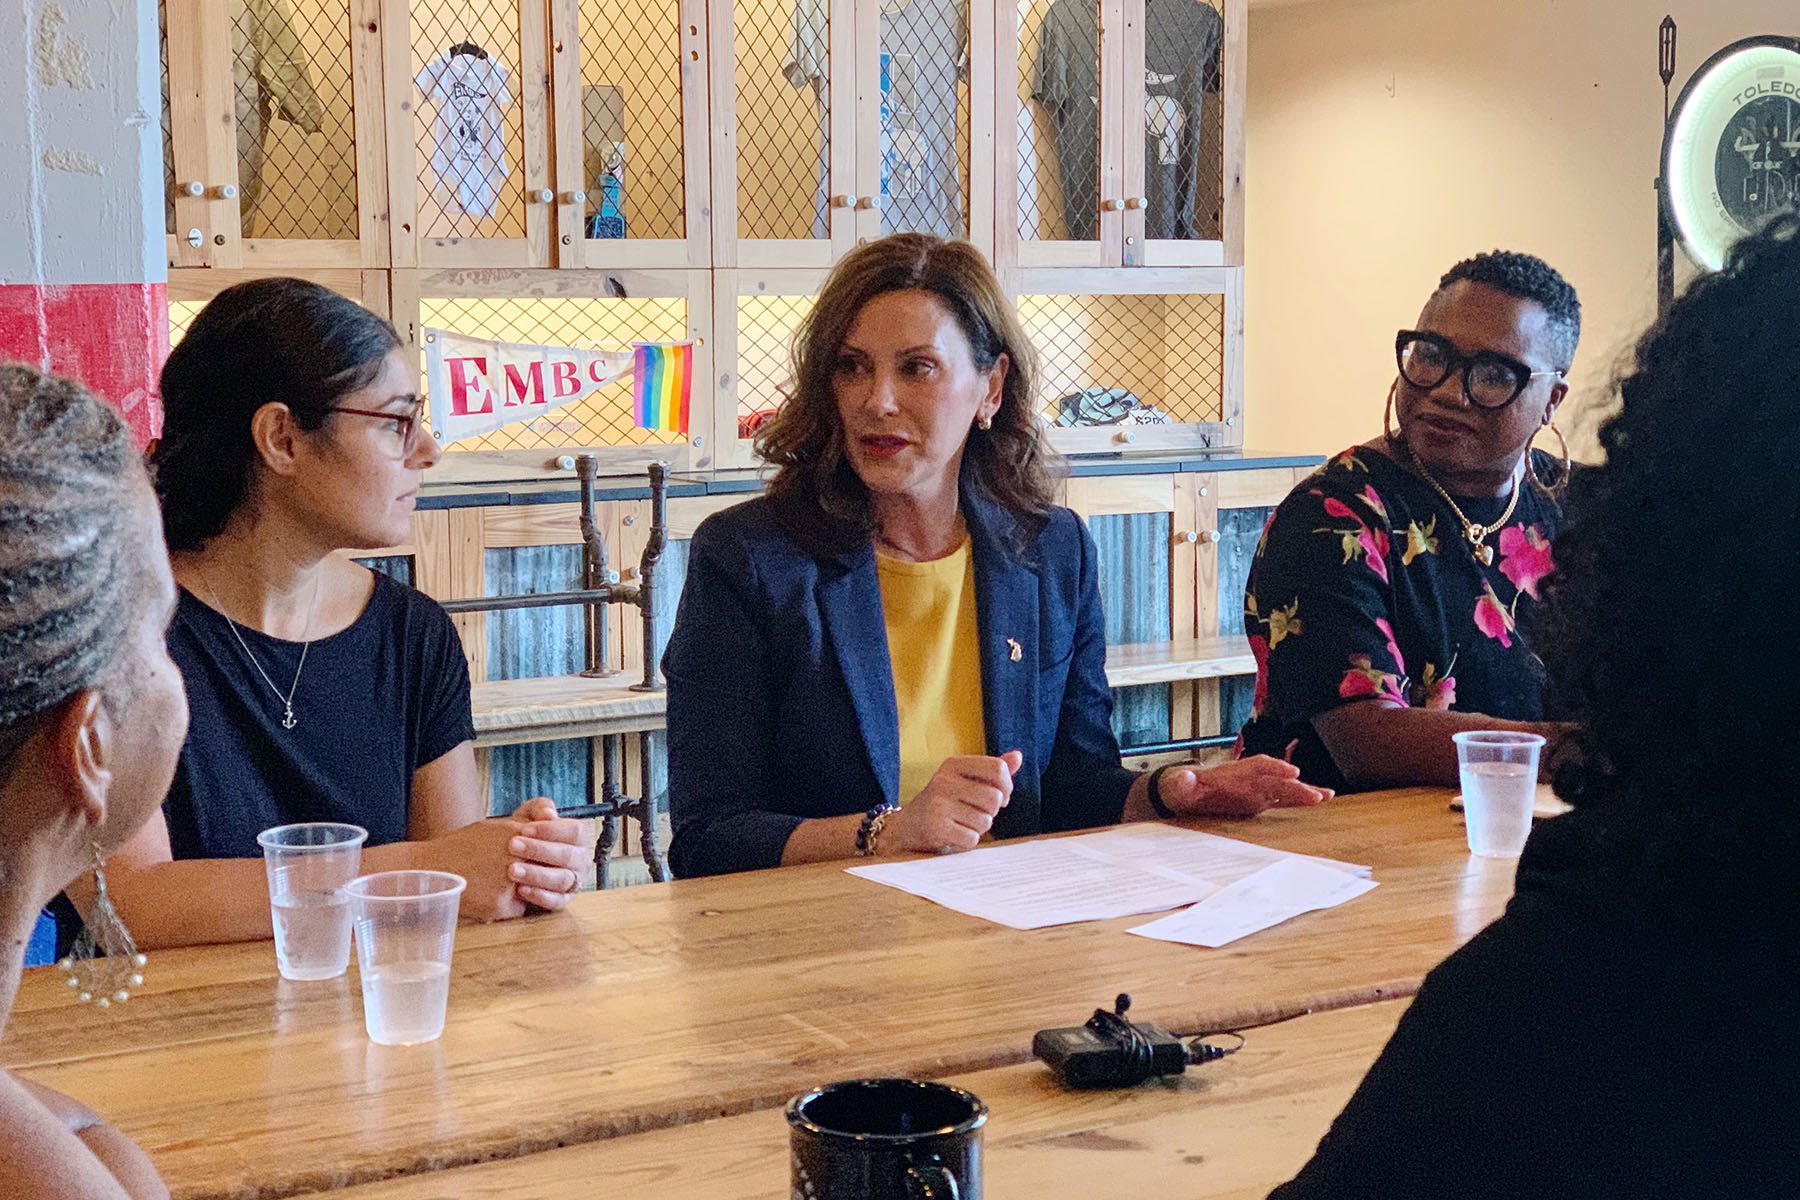 Michigan Gov. Gretchen Whitmer talks to women at an abortion round table discussion.